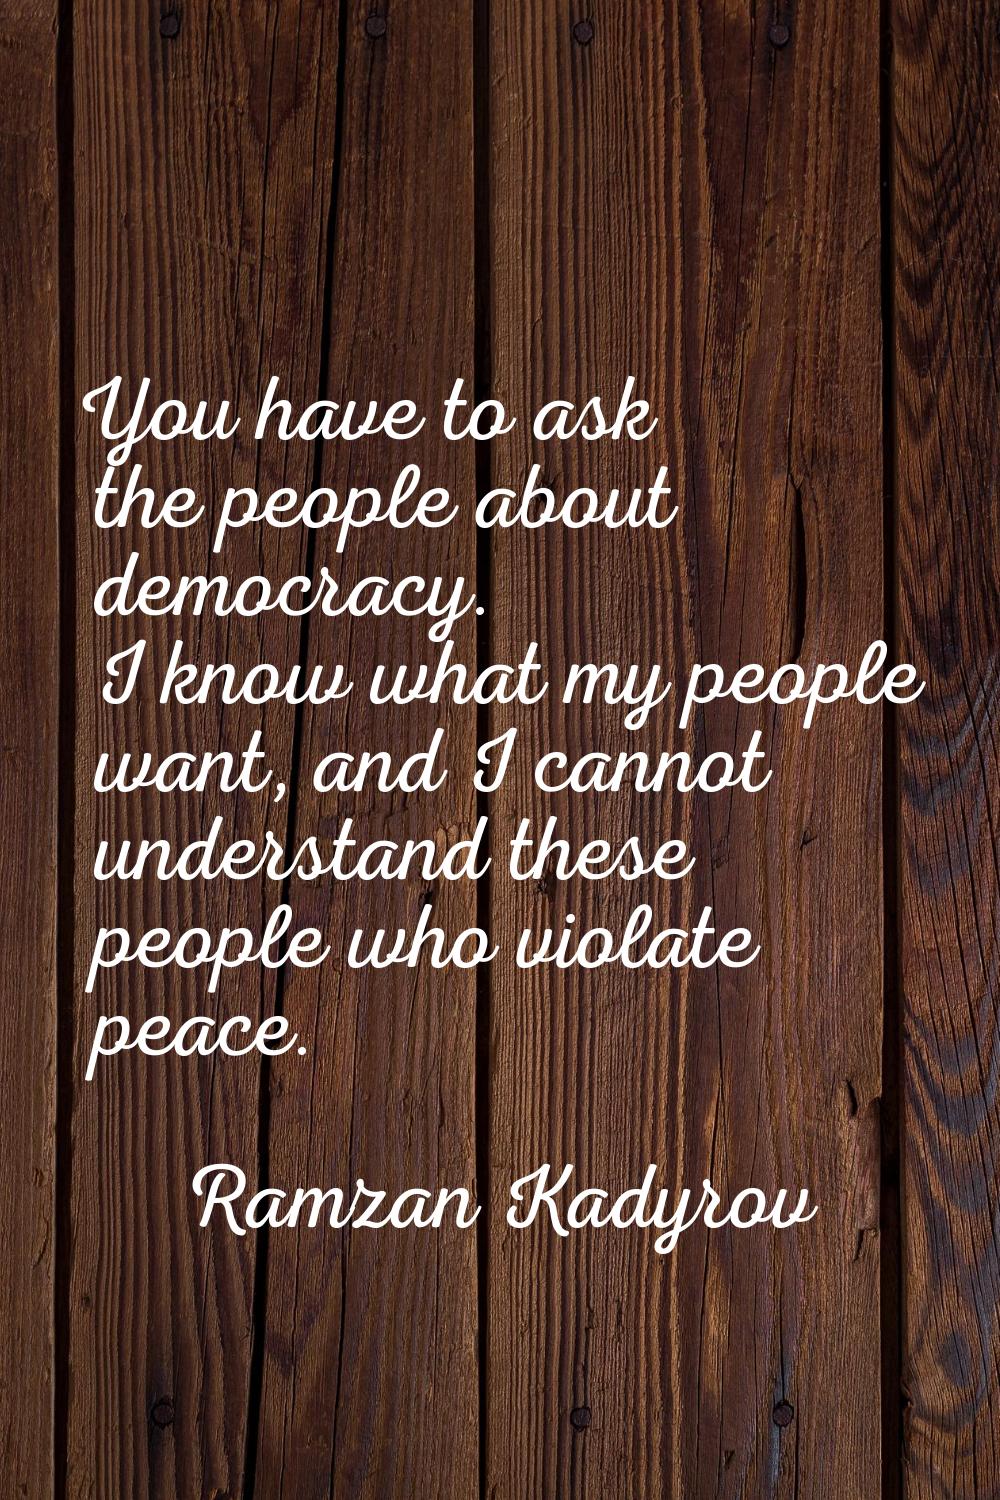 You have to ask the people about democracy. I know what my people want, and I cannot understand the